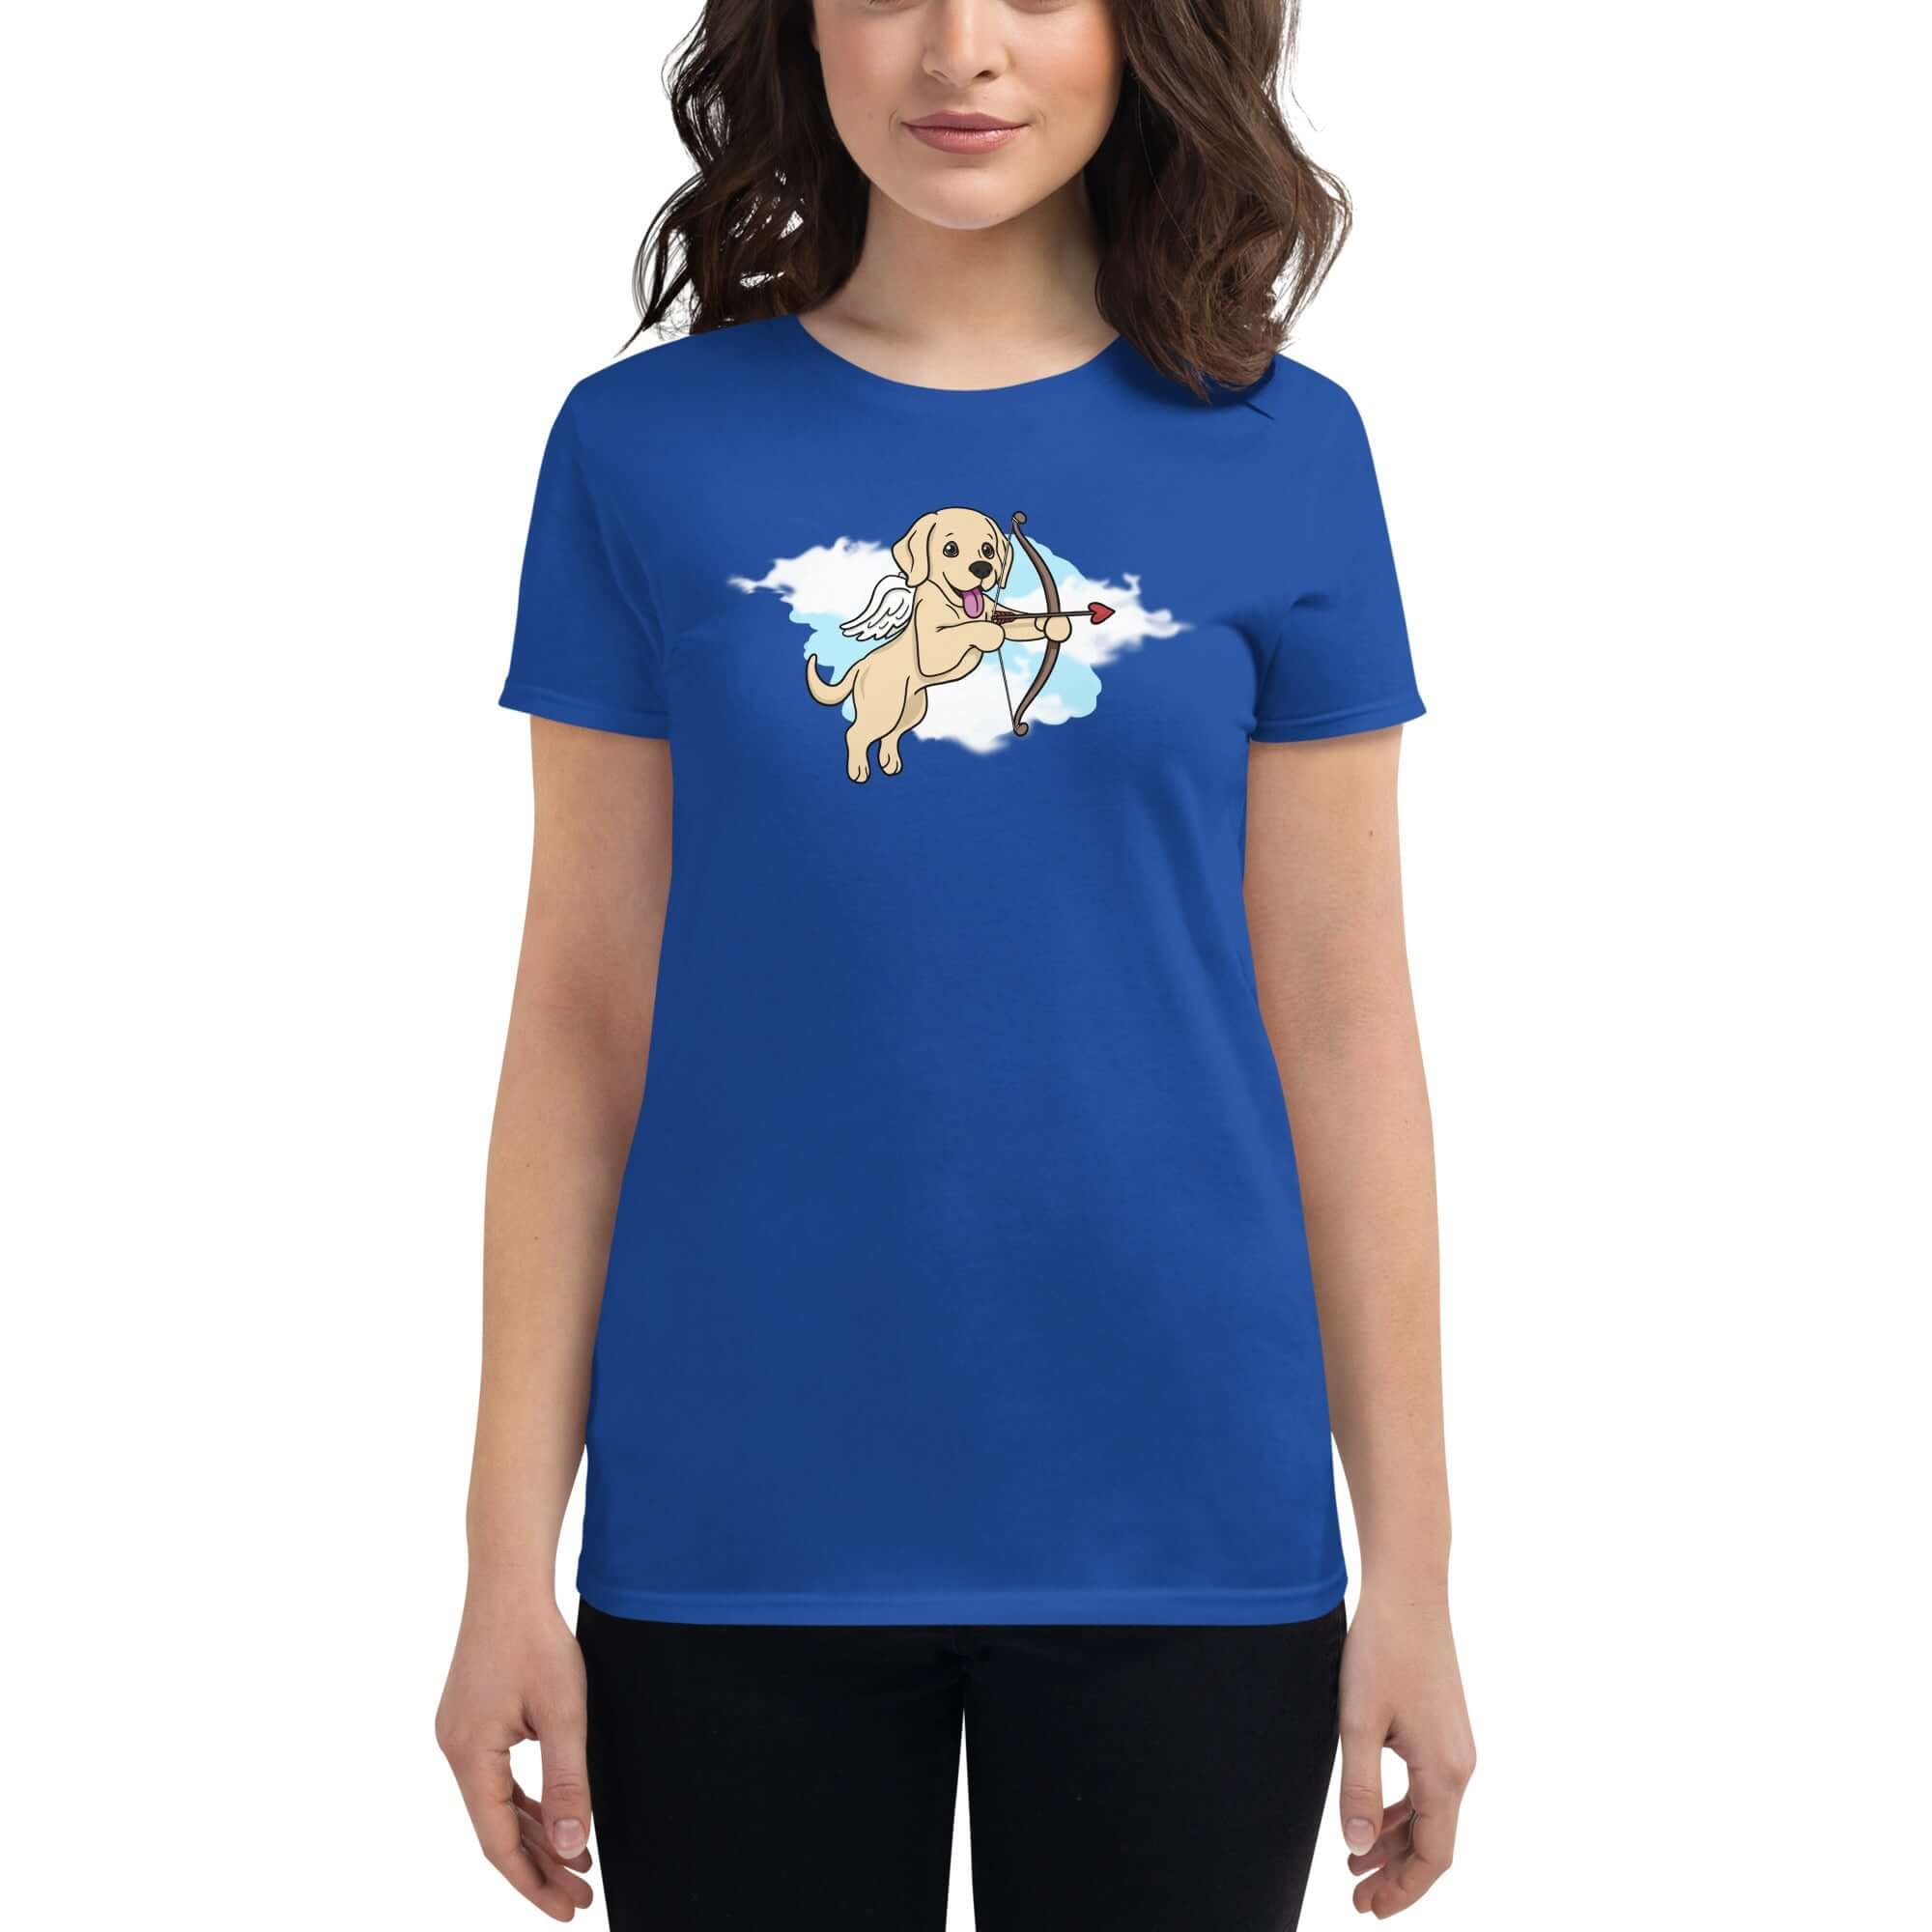 Cupup Women's Fit T-Shirt - TAILWAGS UNLIMITED